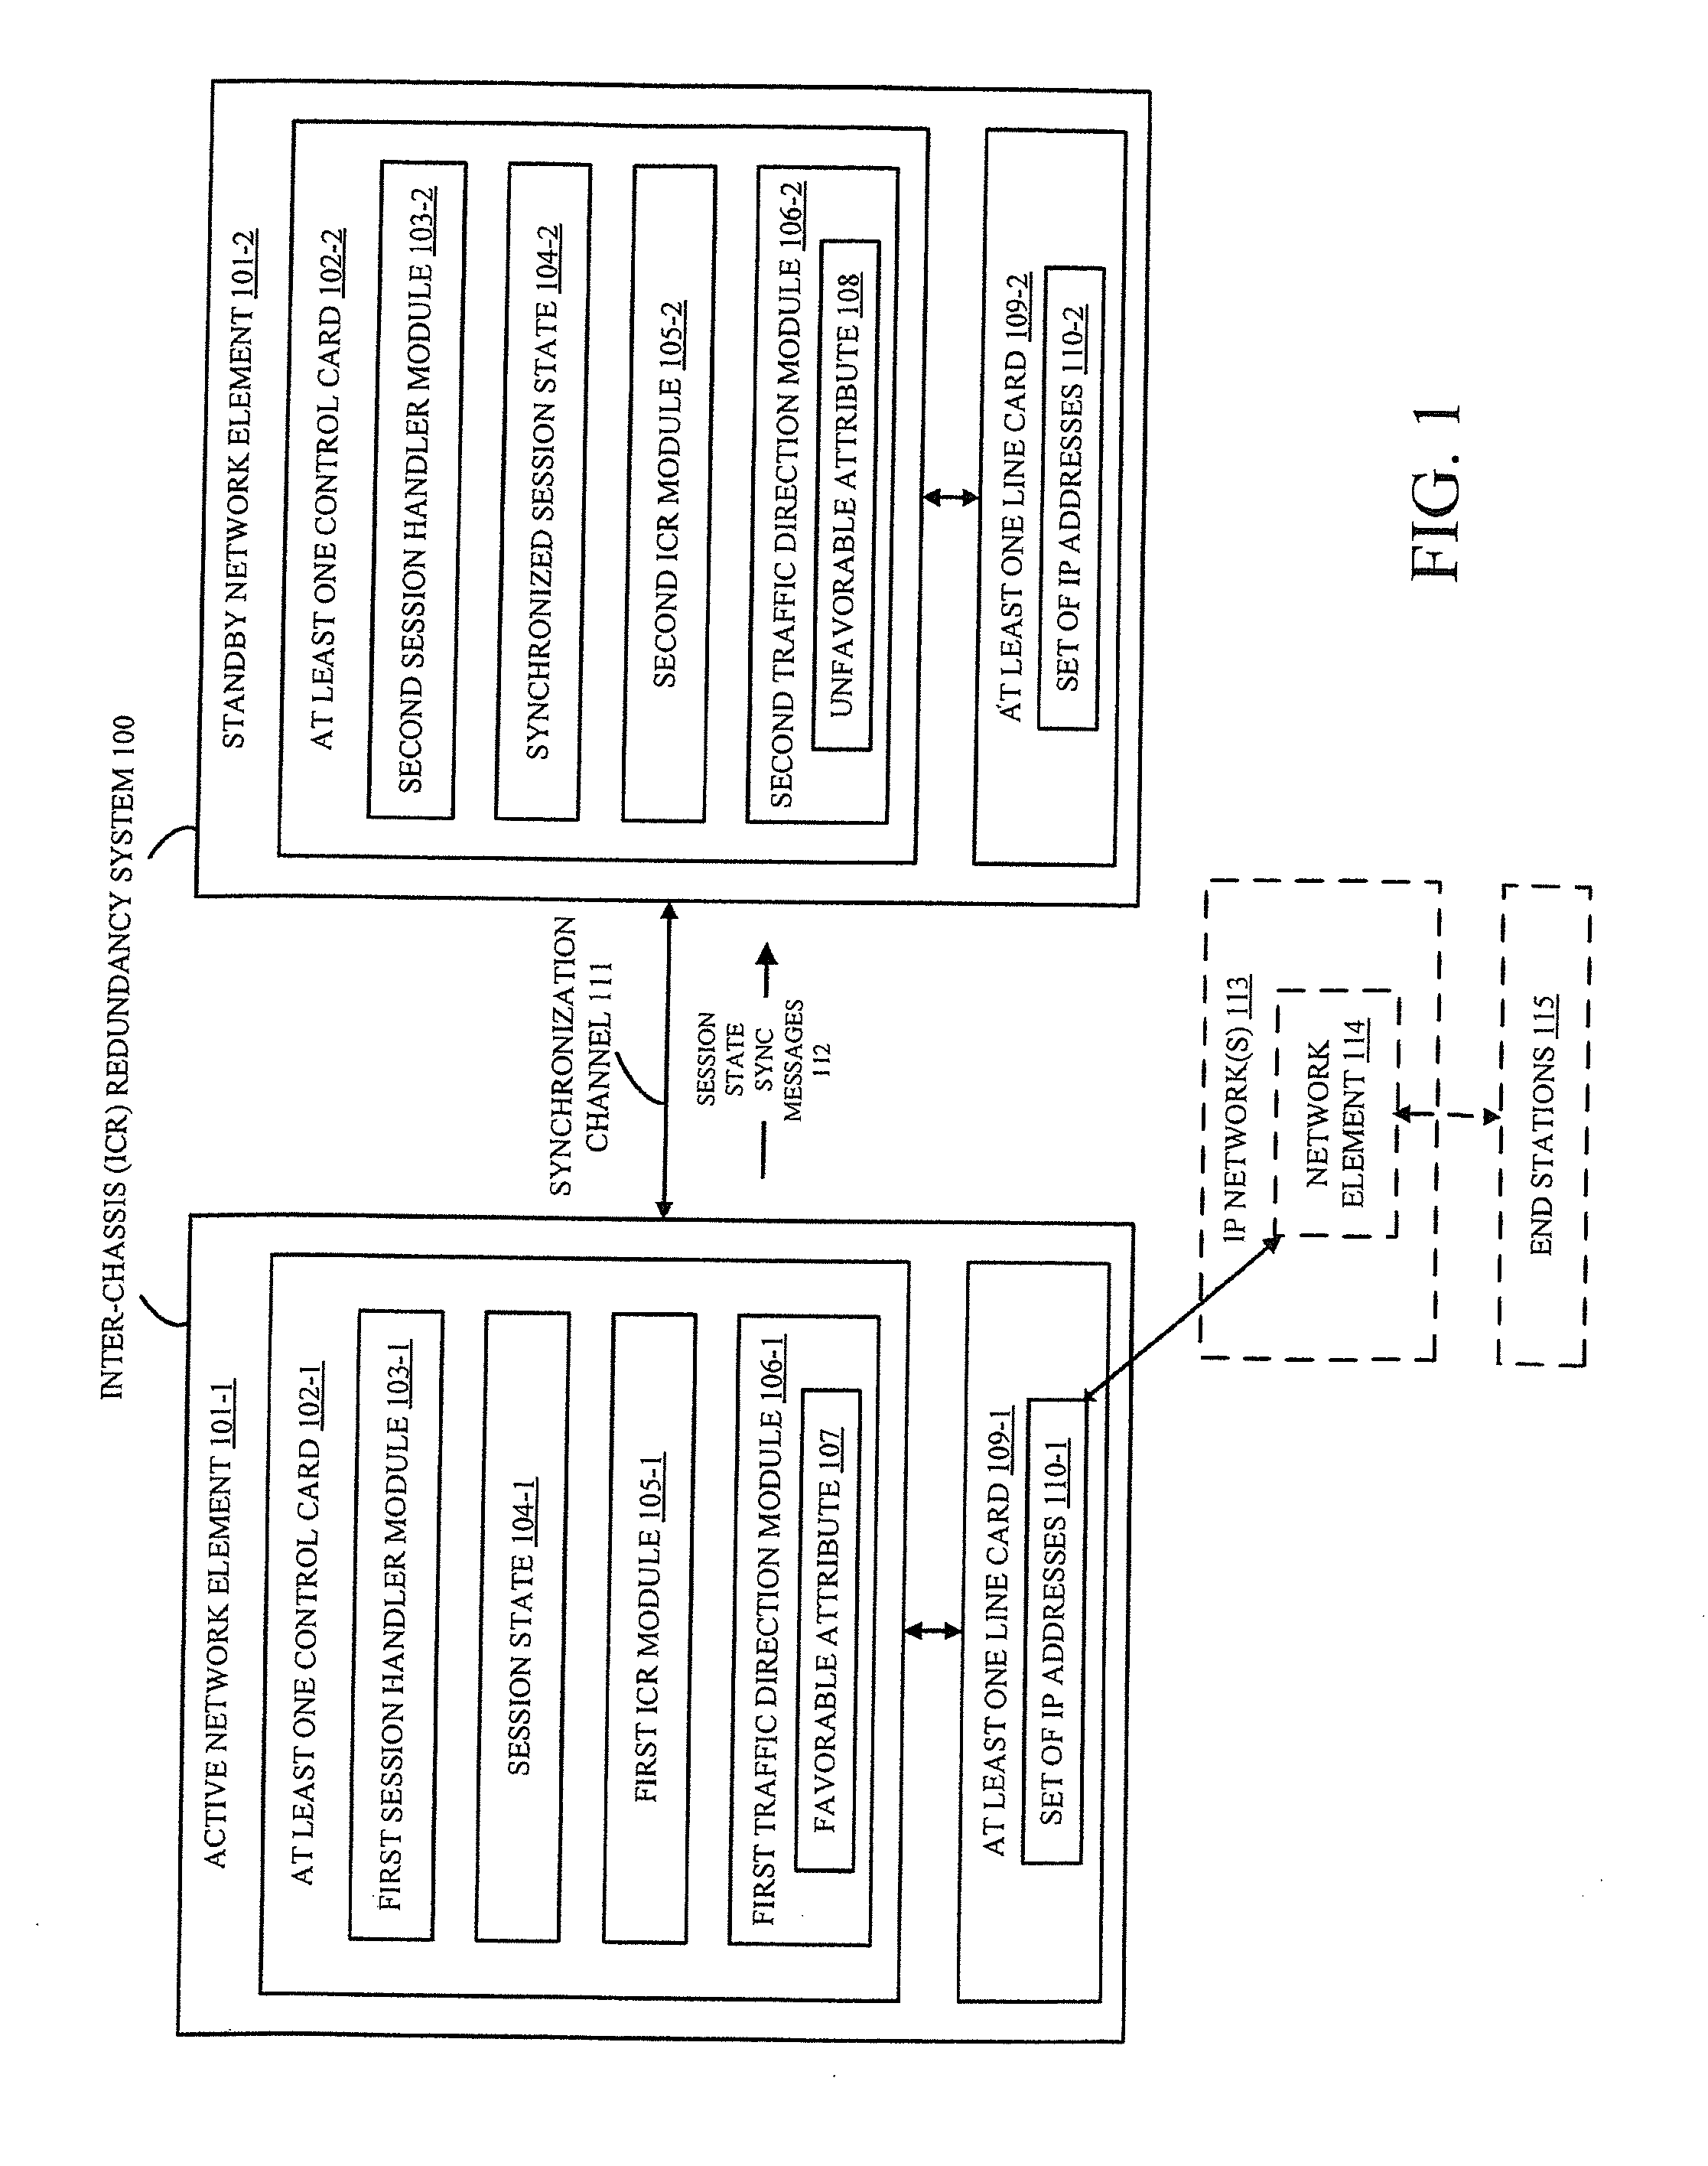 Inter-chassis redundancy with coordinated traffic direction